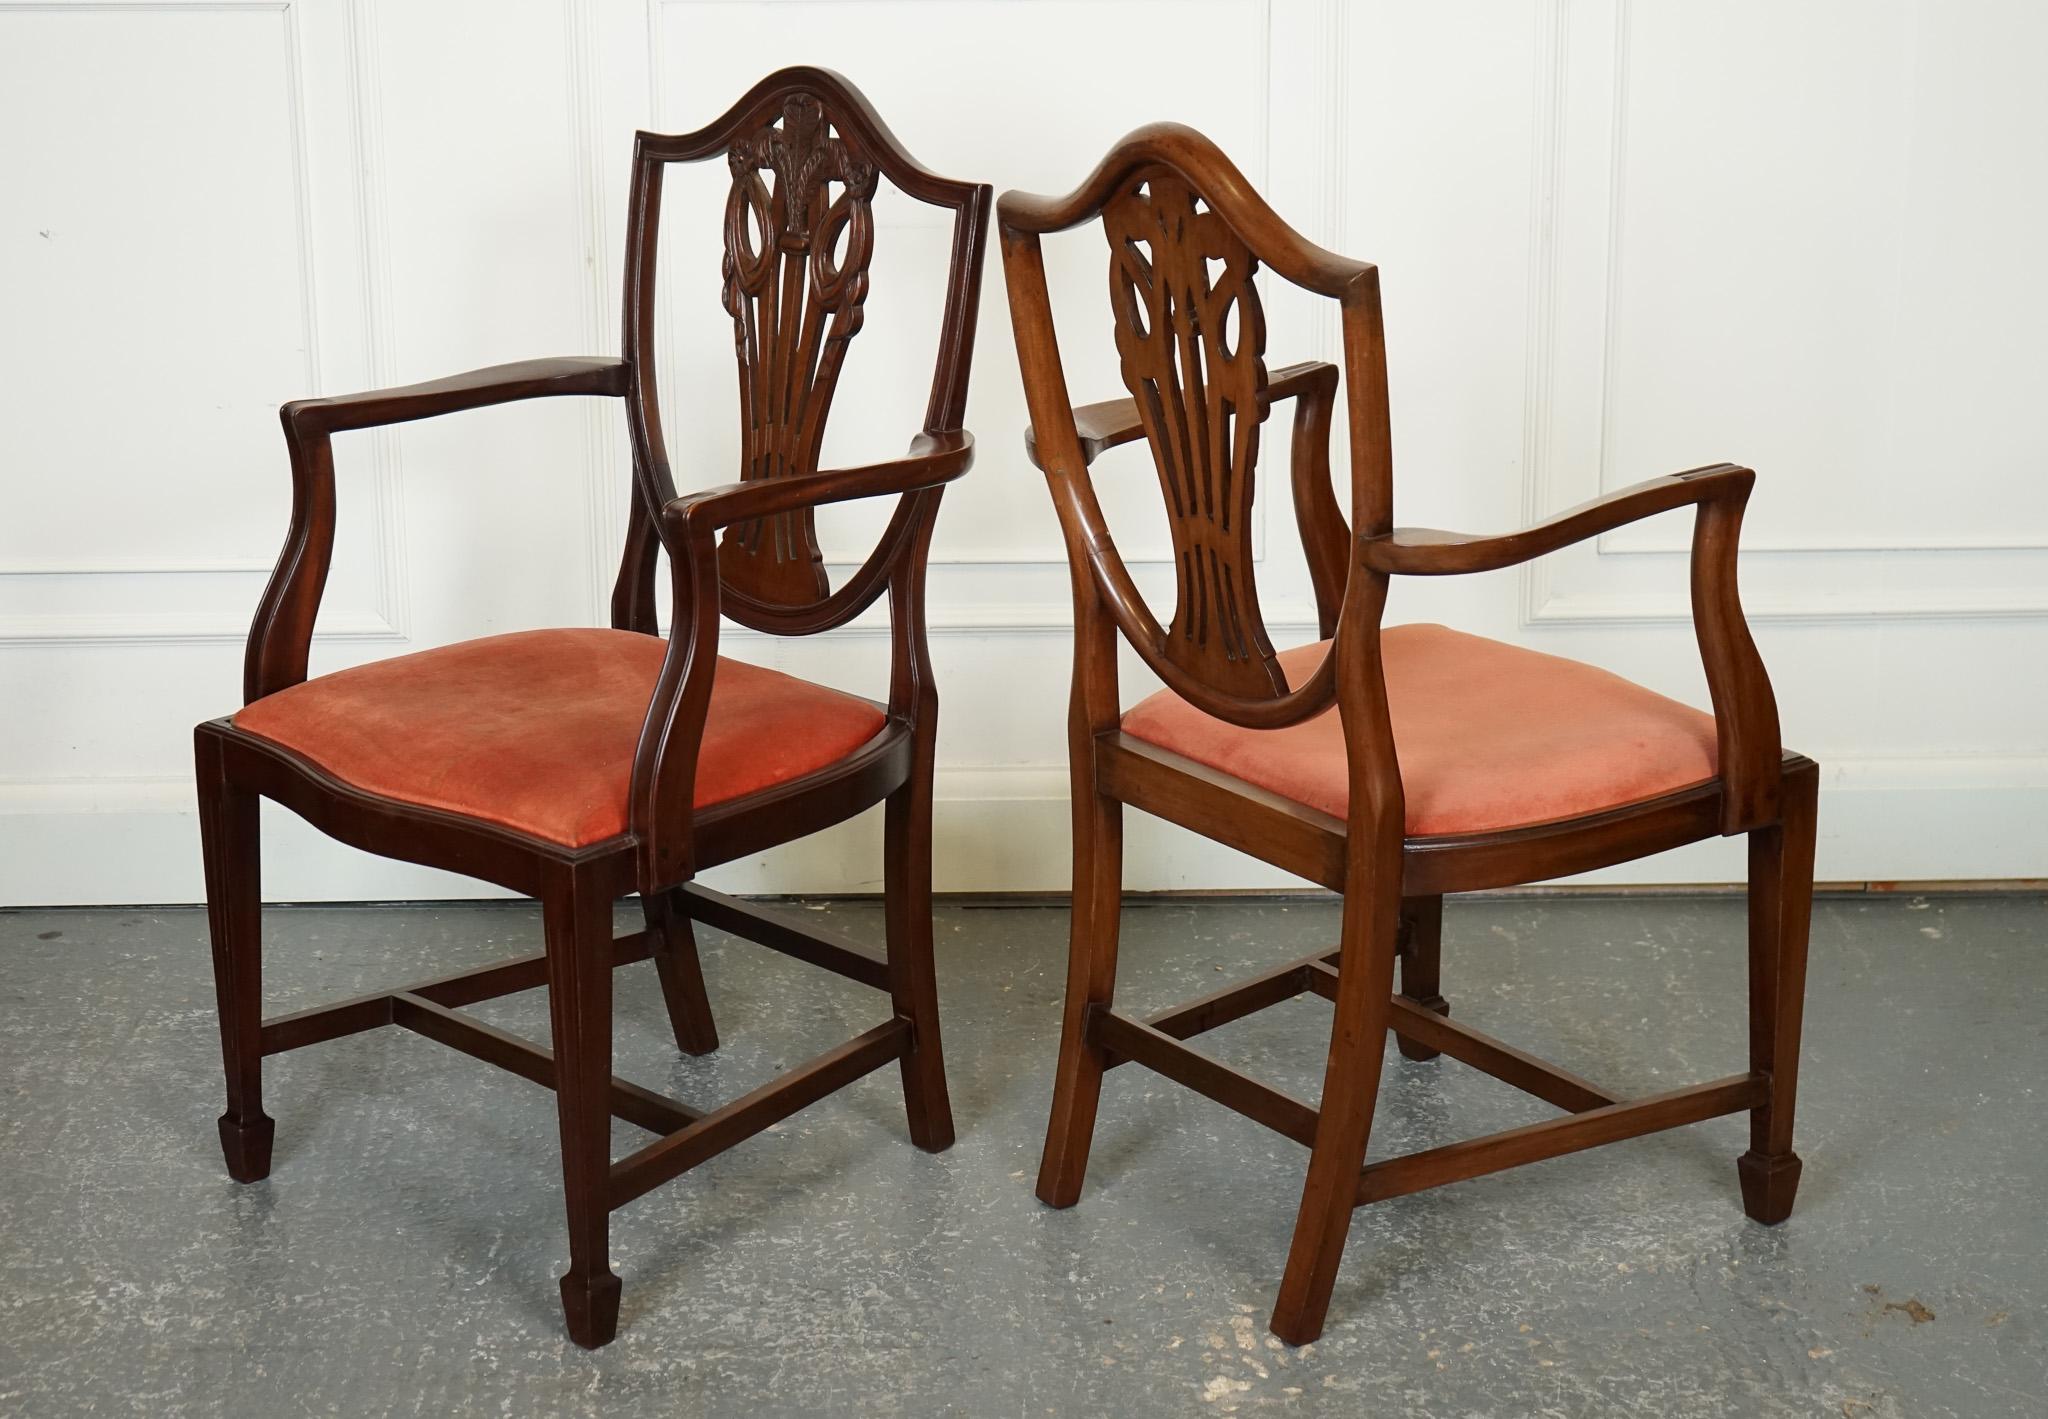 LOVELY PAiR OF VICTORIAN HEPPLEWHITE CARVER HALLWAY SIDE CHAIRS FEATHER FILLED In Good Condition For Sale In Pulborough, GB